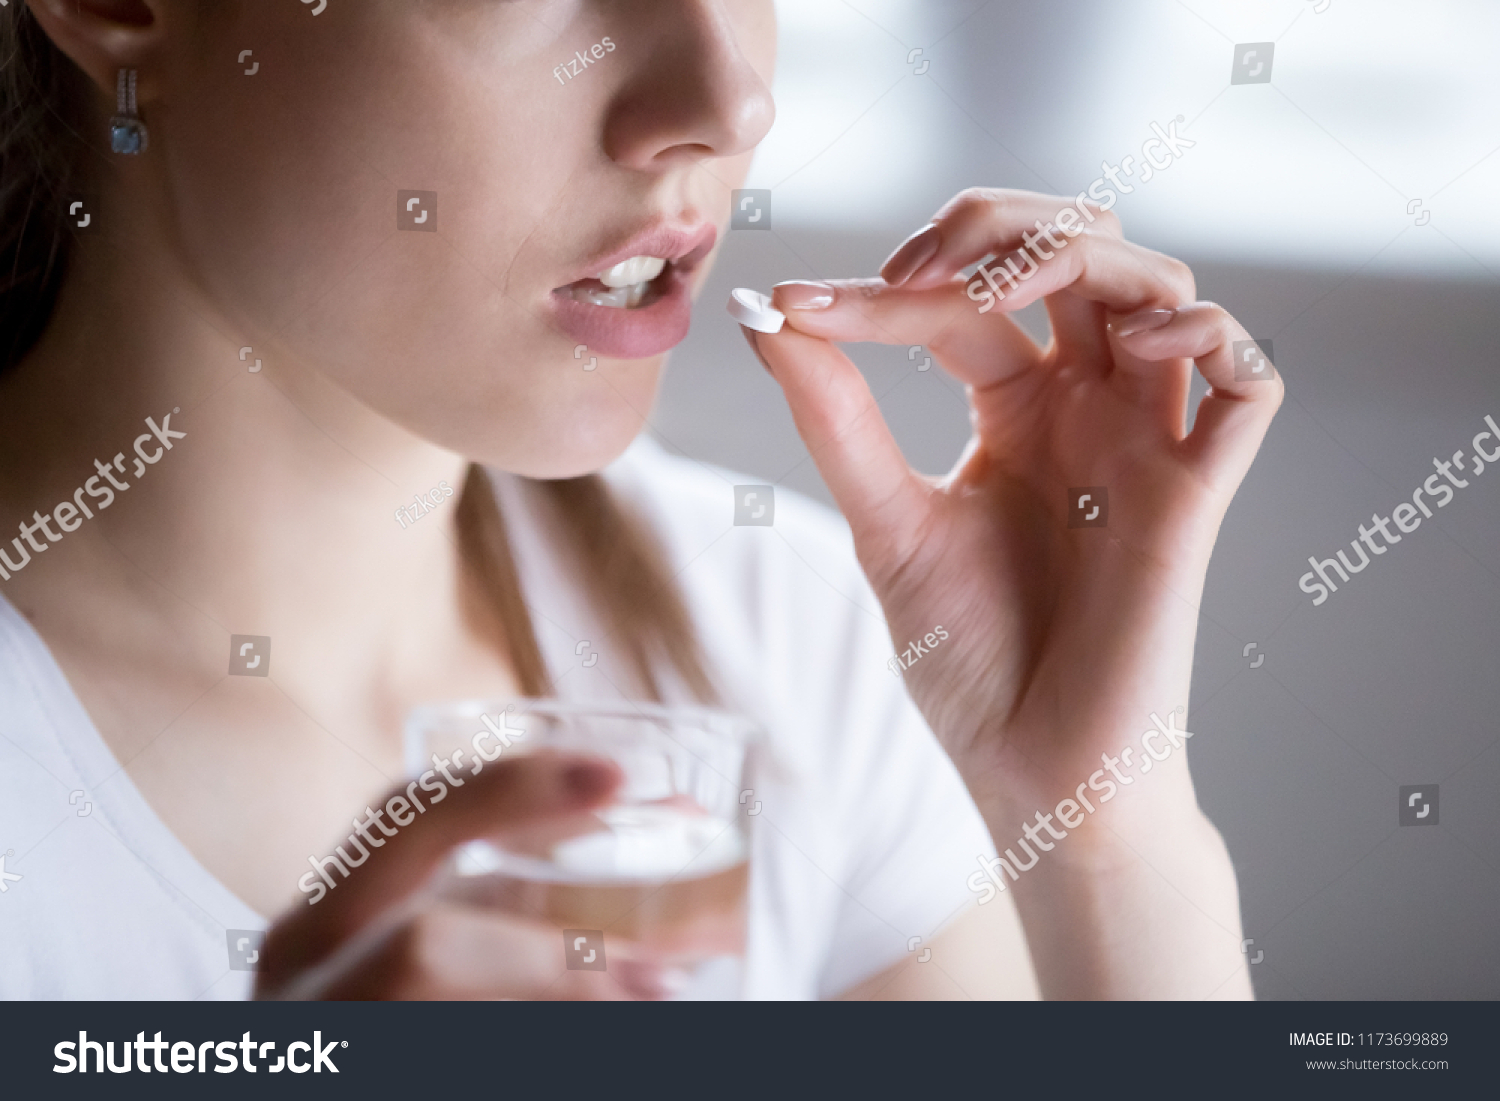 Close up of unhealthy woman feel unwell taking pill from headache or pain, female have painkiller or antibiotic medicine, girl hold glass of water and antidepressant suffering from depression #1173699889